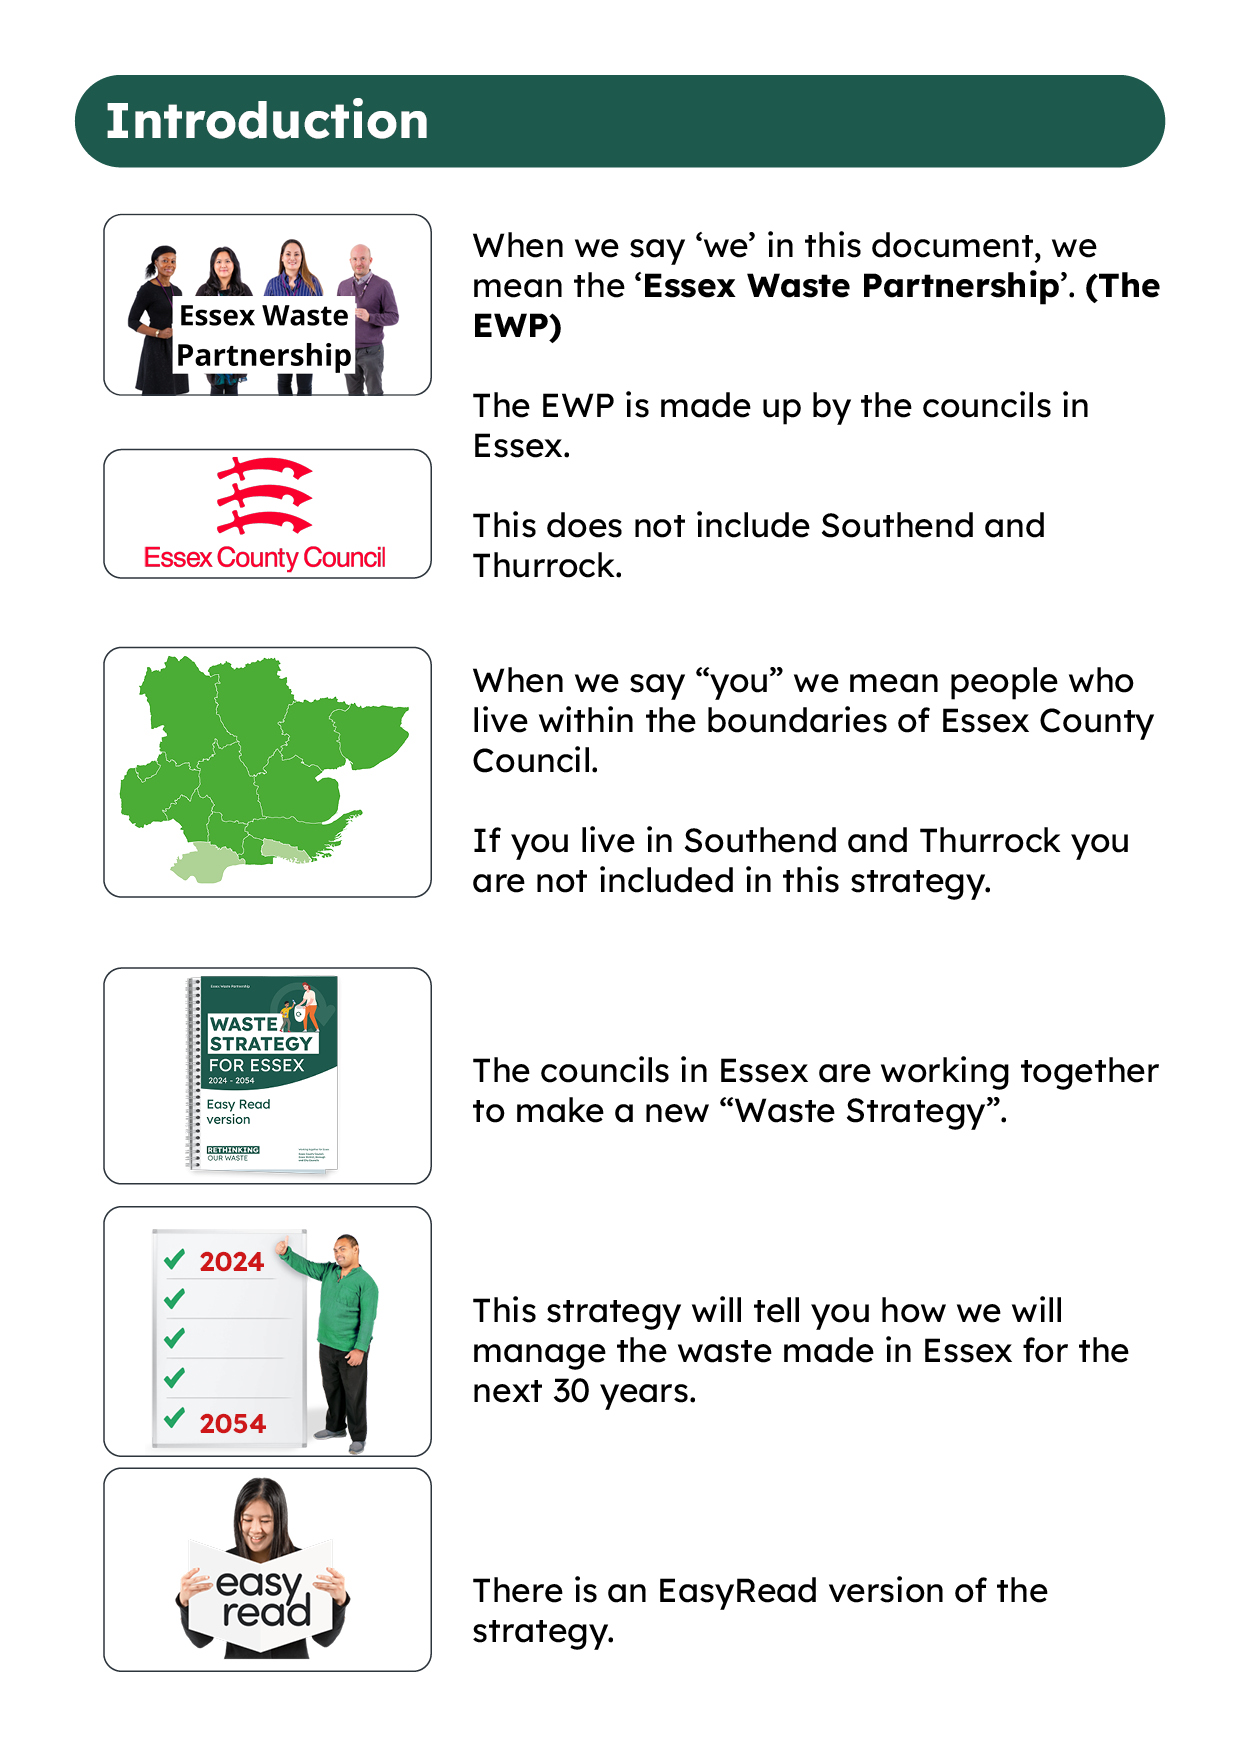 Title:Introduction. Image: 4 people holding a Essex Waste Partnership sign. This represents When we say ‘we’ in this document, we mean the ‘Essex Waste Partnership’. (The EWP) The EWP is made up by the councils in Essex. IMAGE: Essex county council logo. This represents This does not include Southend and Thurrock.  IMAGE: Map of Essex. This represents  When we say “you” we mean people who live within the boundaries of Essex County Council. If you live in Southend and Thurrock you are not included in this strategy.. IMAGE:  Document with Waste strategy for Essex title. This represents The councils in Essex are working together to make a new “Waste Strategy”. IMAGE:  A person pointing to a calendar from the year 2024 to 2054 with 5 green ticks next to the years. This represents This strategy will tell you how we will manage the waste made in Essex for the next 30 years. Image: Person reading a book with easy read title on this. This represents - There is an EasyRead version of the strategy.